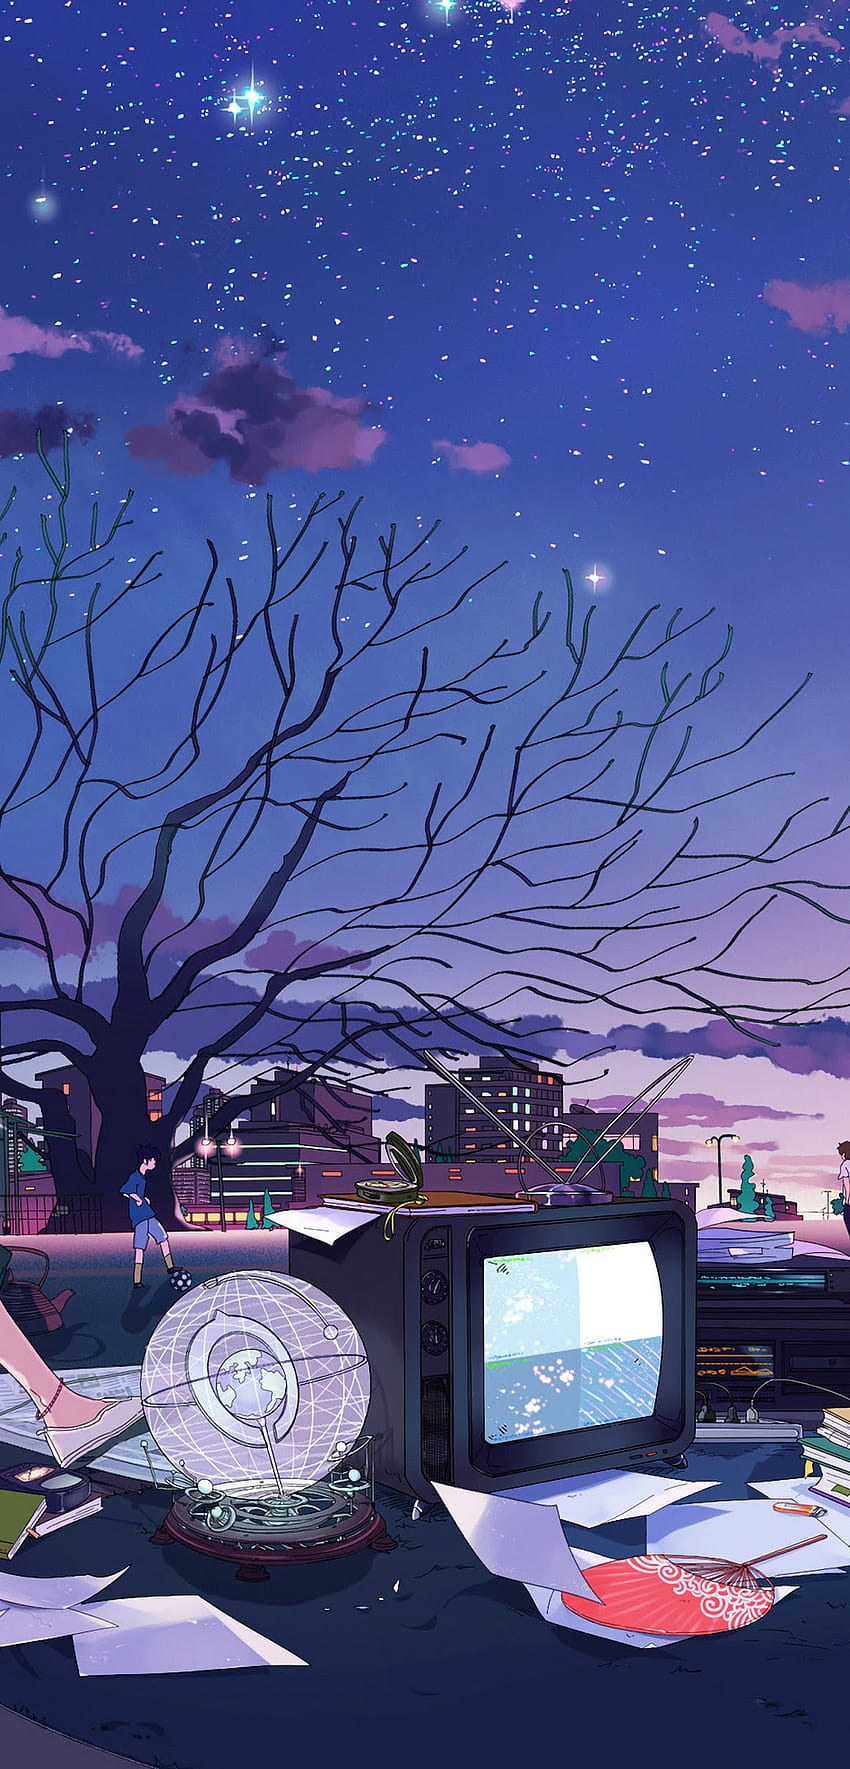 A digital painting of a cityscape at night with a TV and a starry sky - Camping